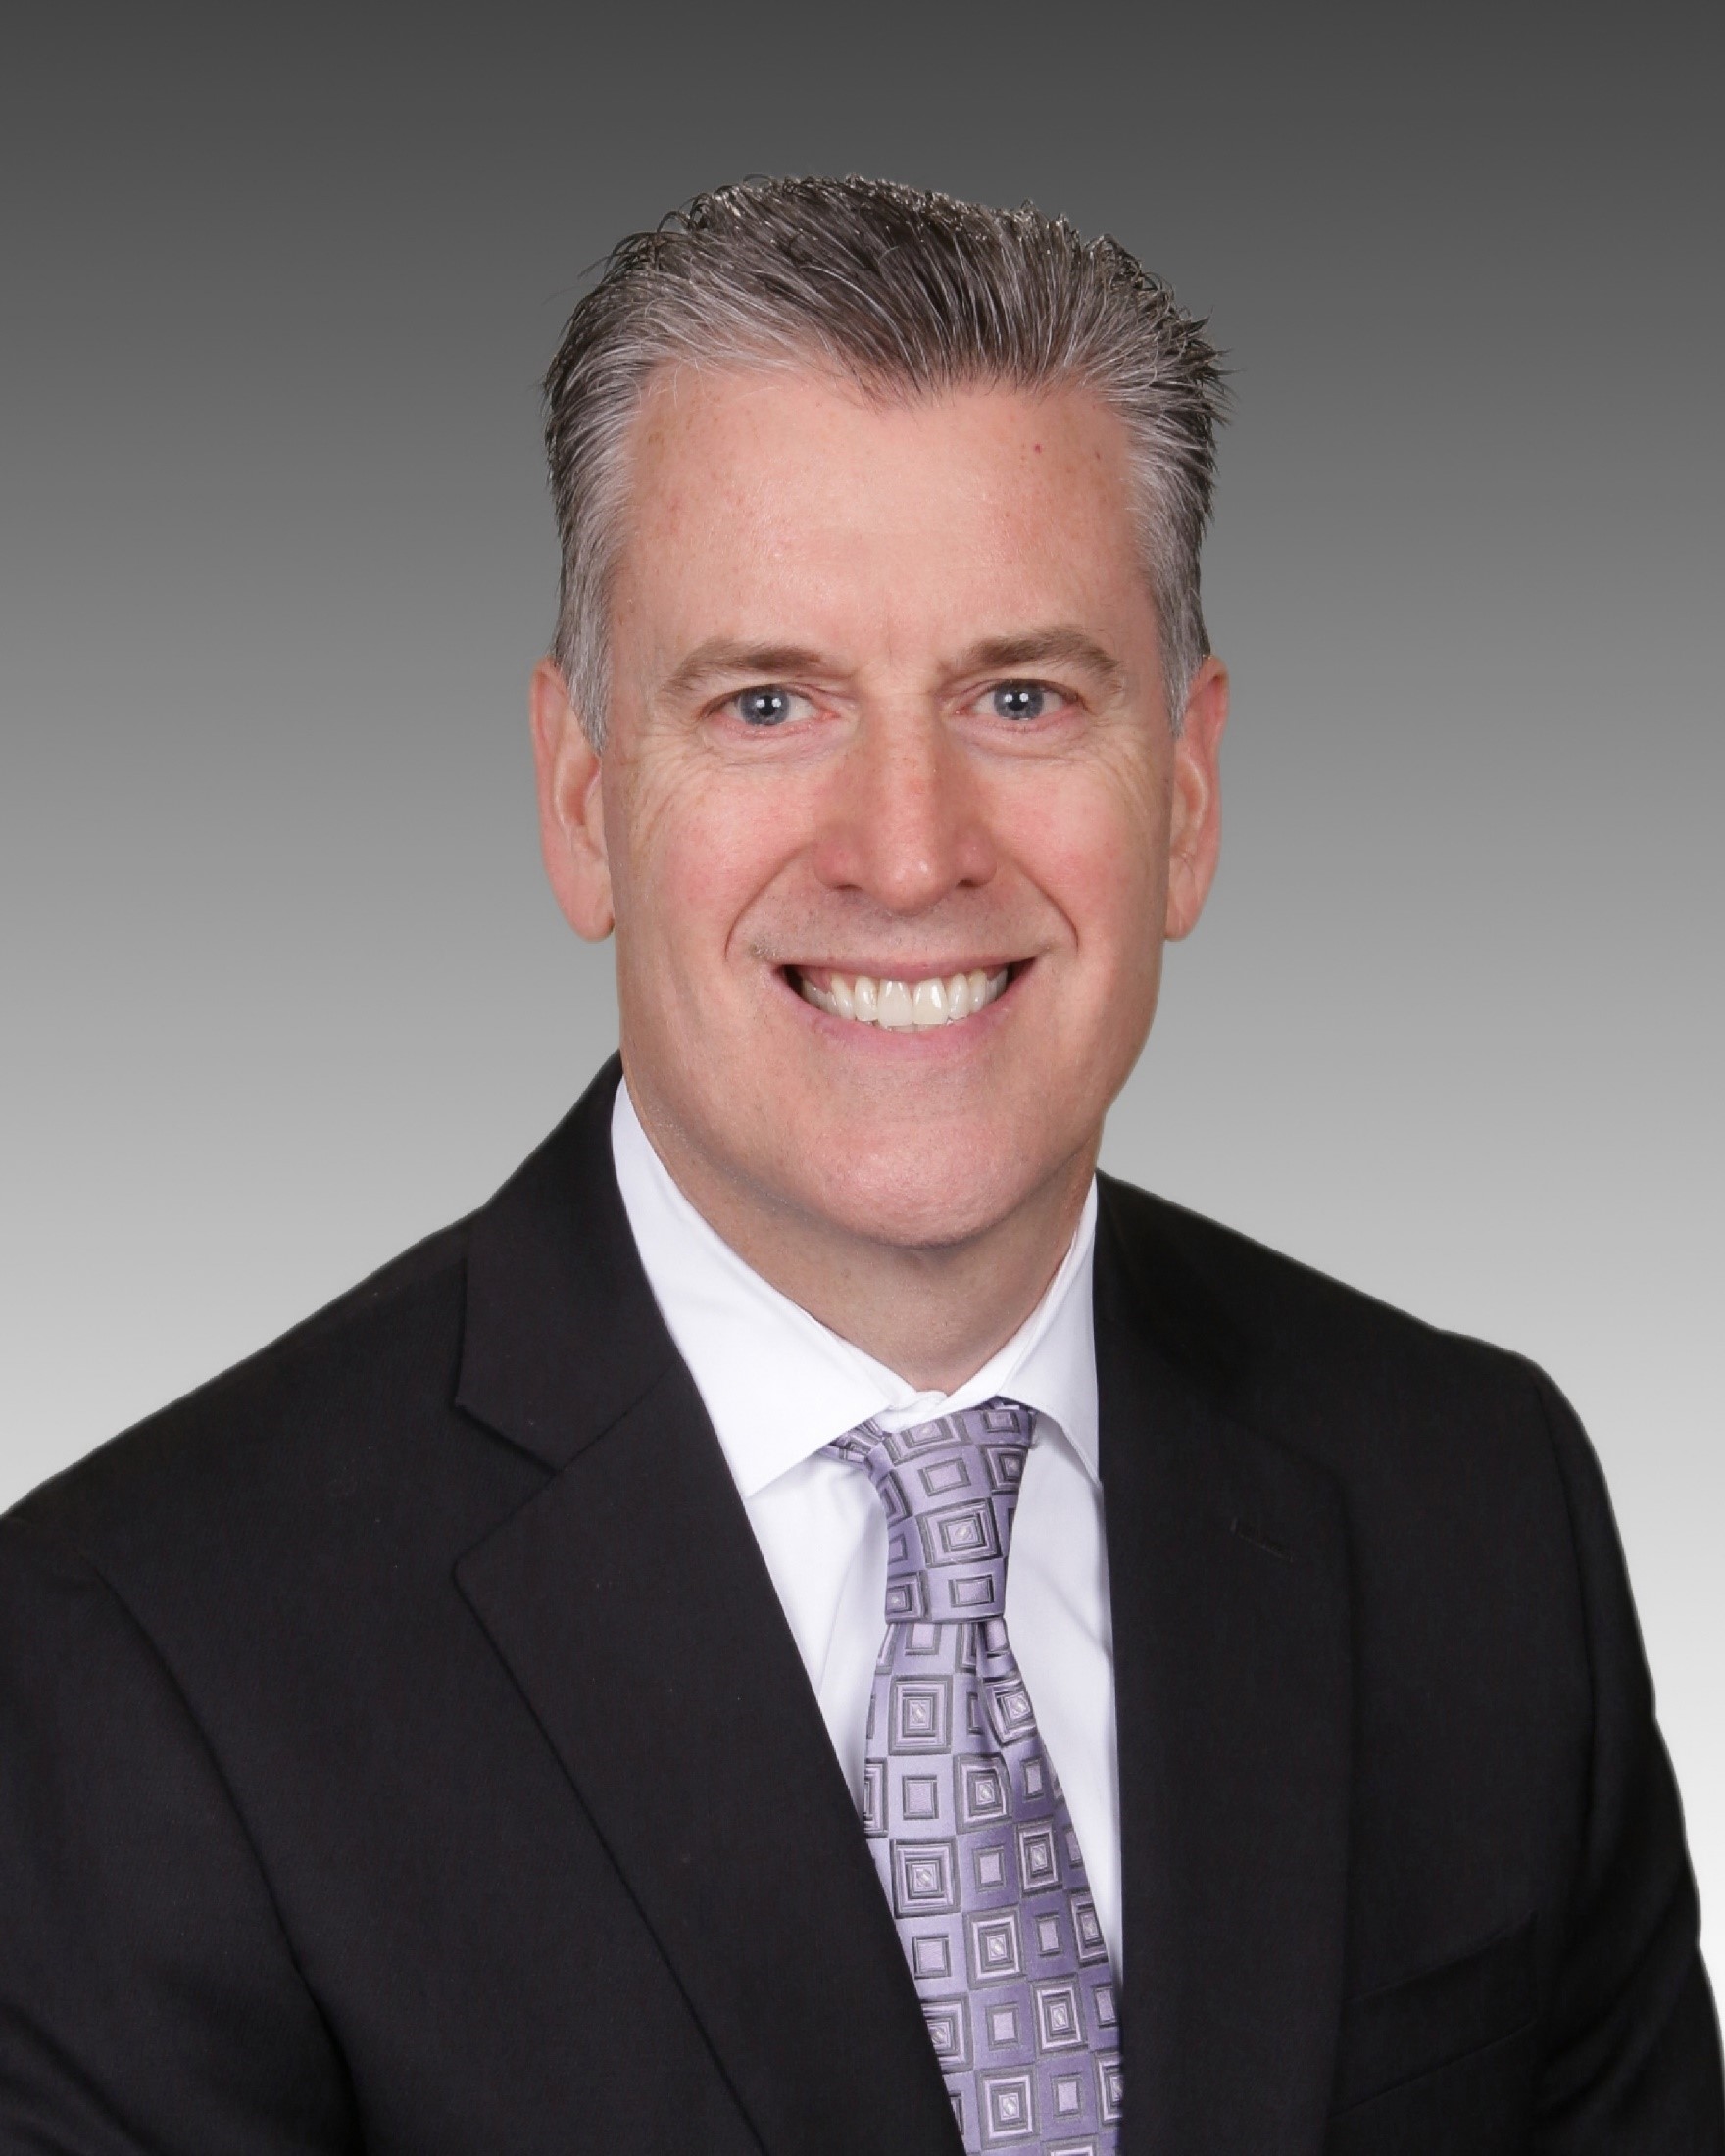 Tim Phillips, CEO & Director on the Board of Directors